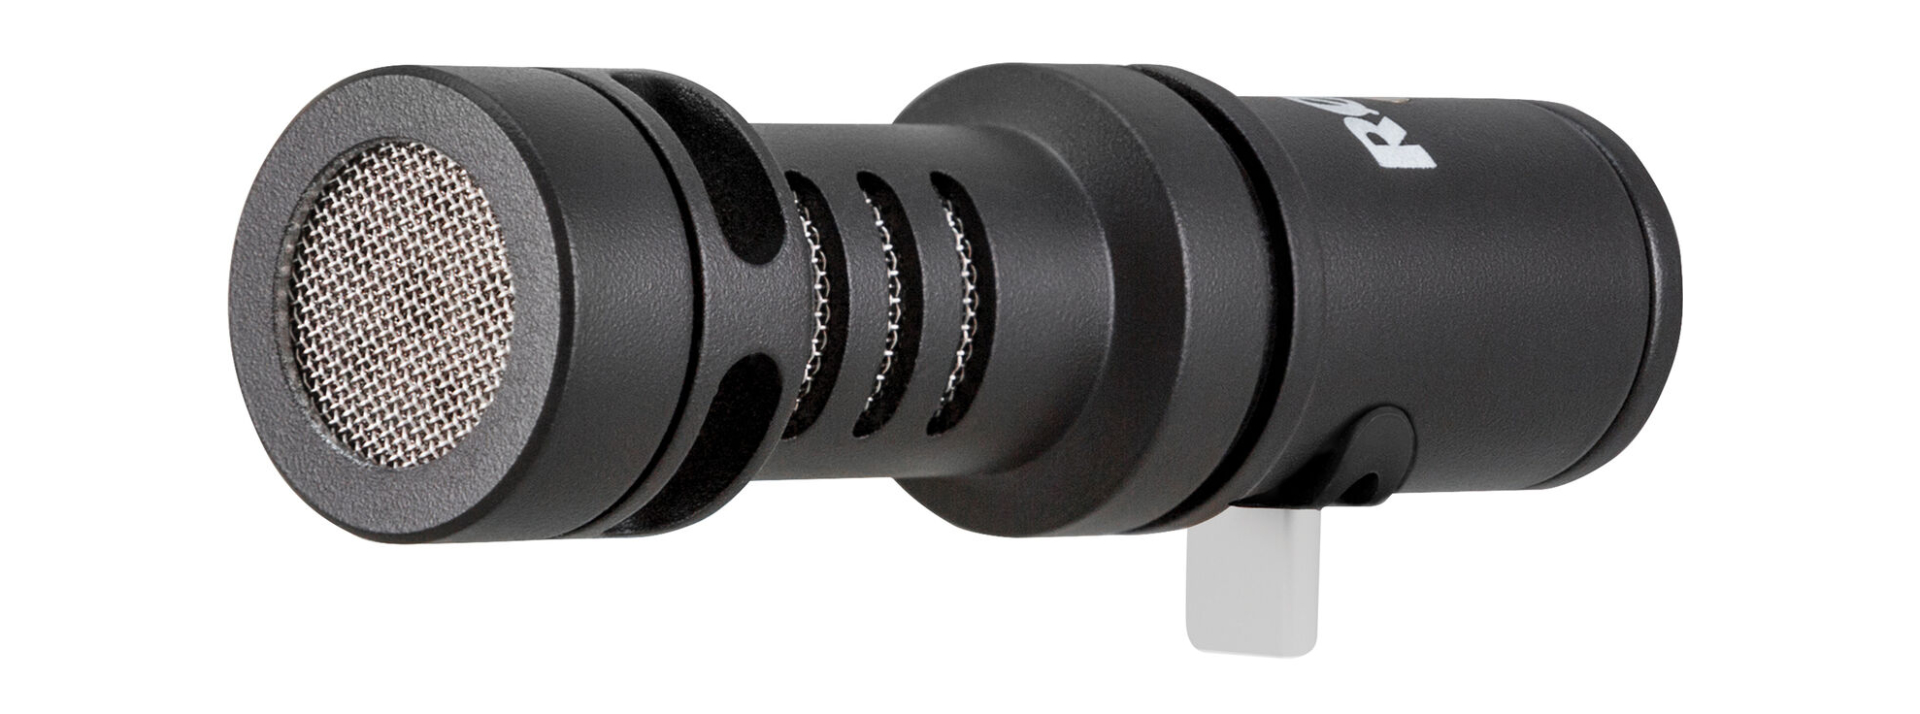 RØDE VideoMic Me-C – Now Available as a Standalone Unit | CineD